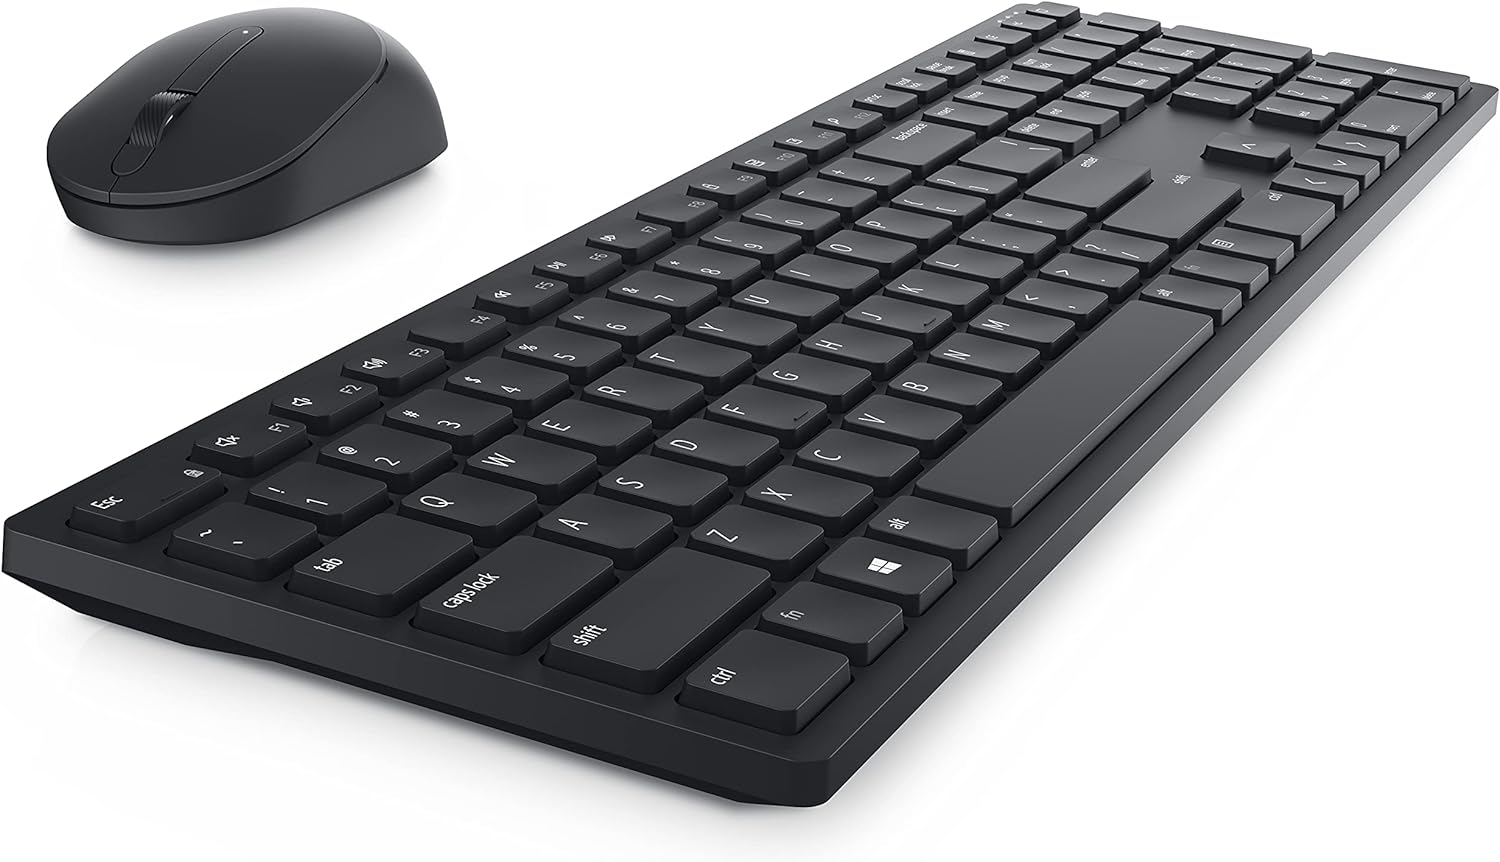 German (QWERTZ) Dell Pro Wireless Keyboard and Mouse Combo 5397184494745